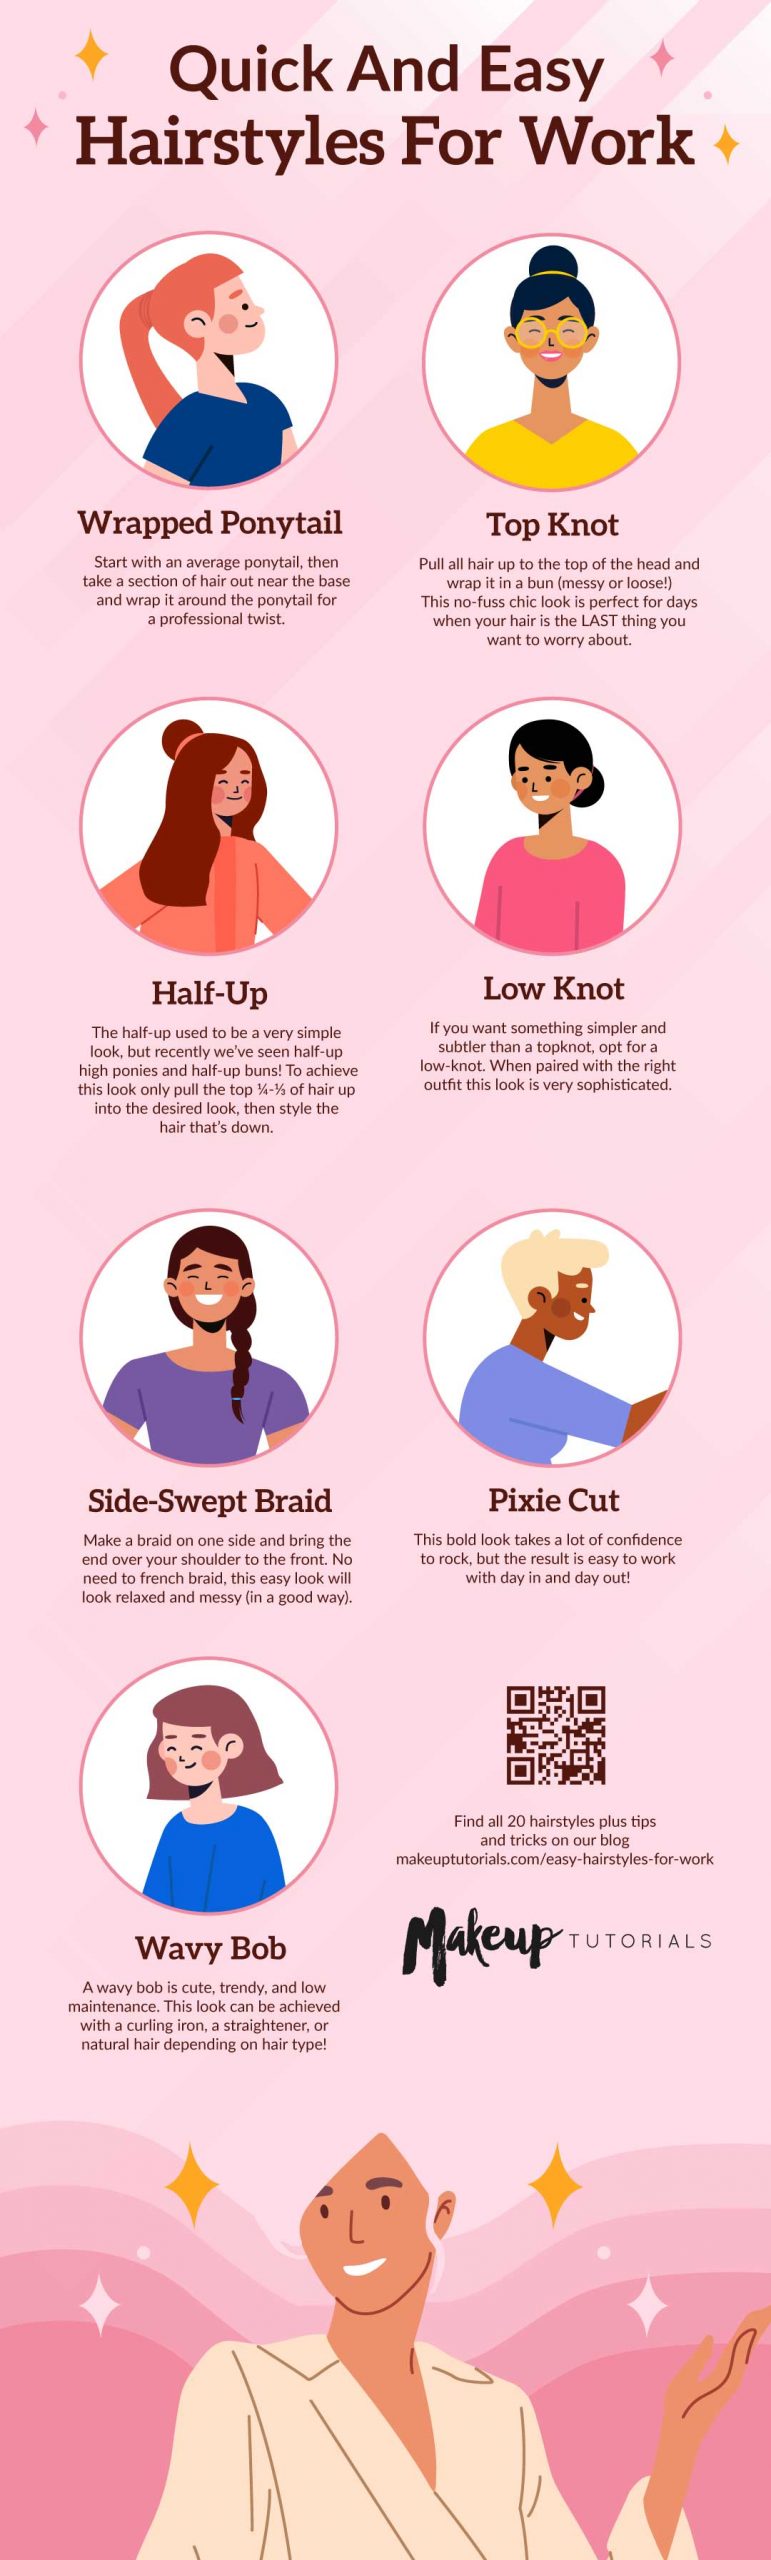 20 Hairstyles For Work | Easy Hairstyles You Can Do [INFOGRAPHIC]